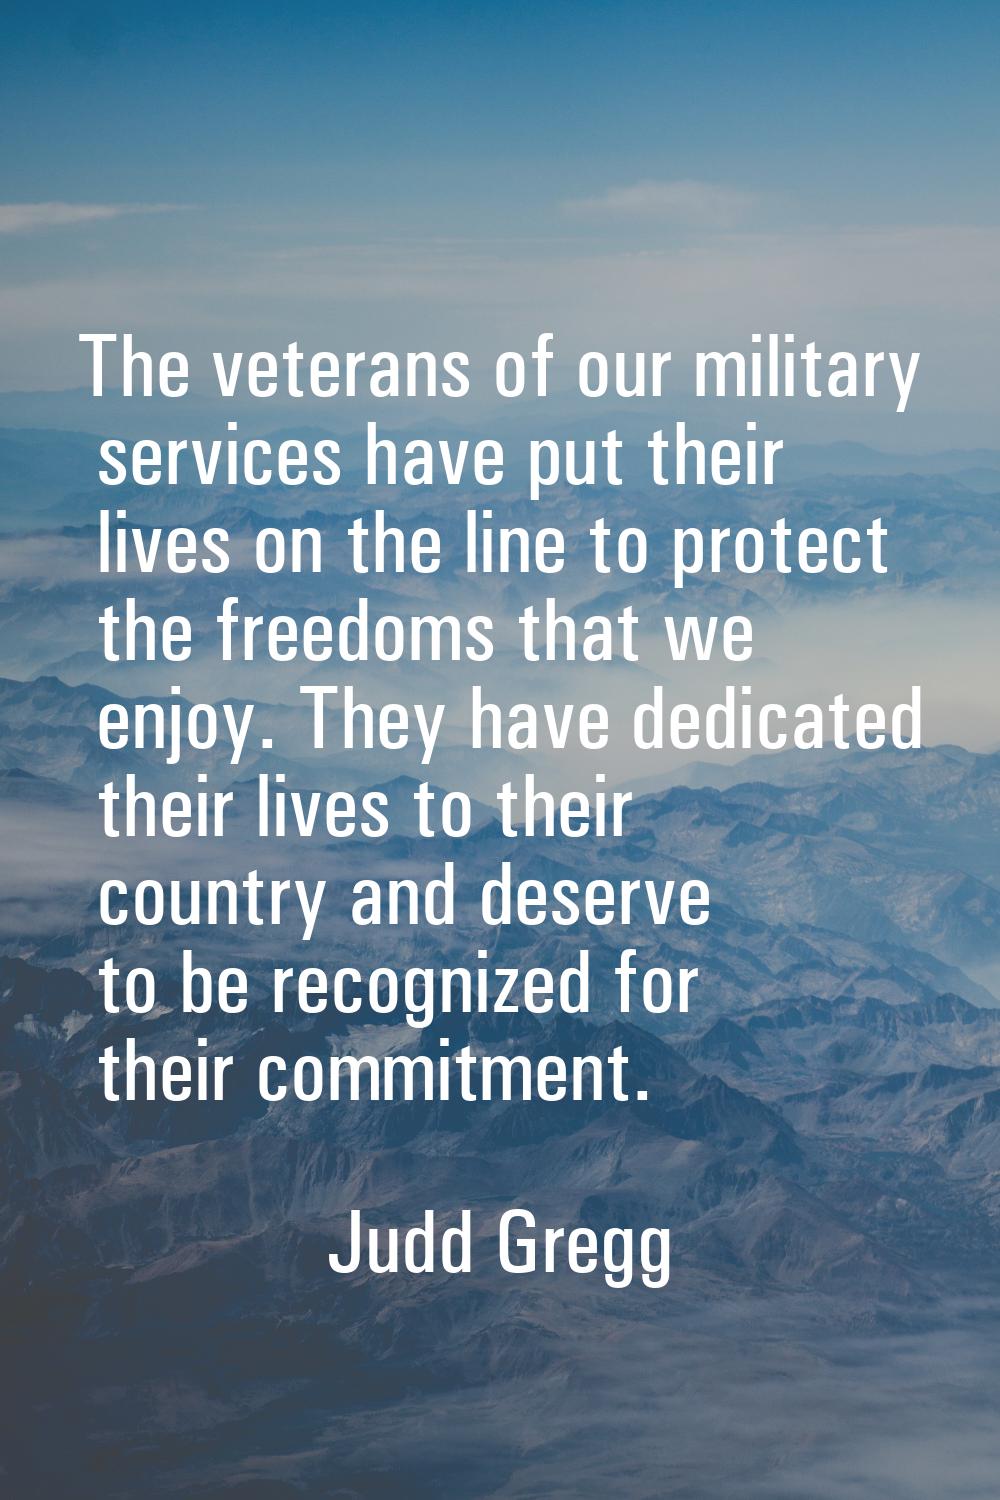 The veterans of our military services have put their lives on the line to protect the freedoms that